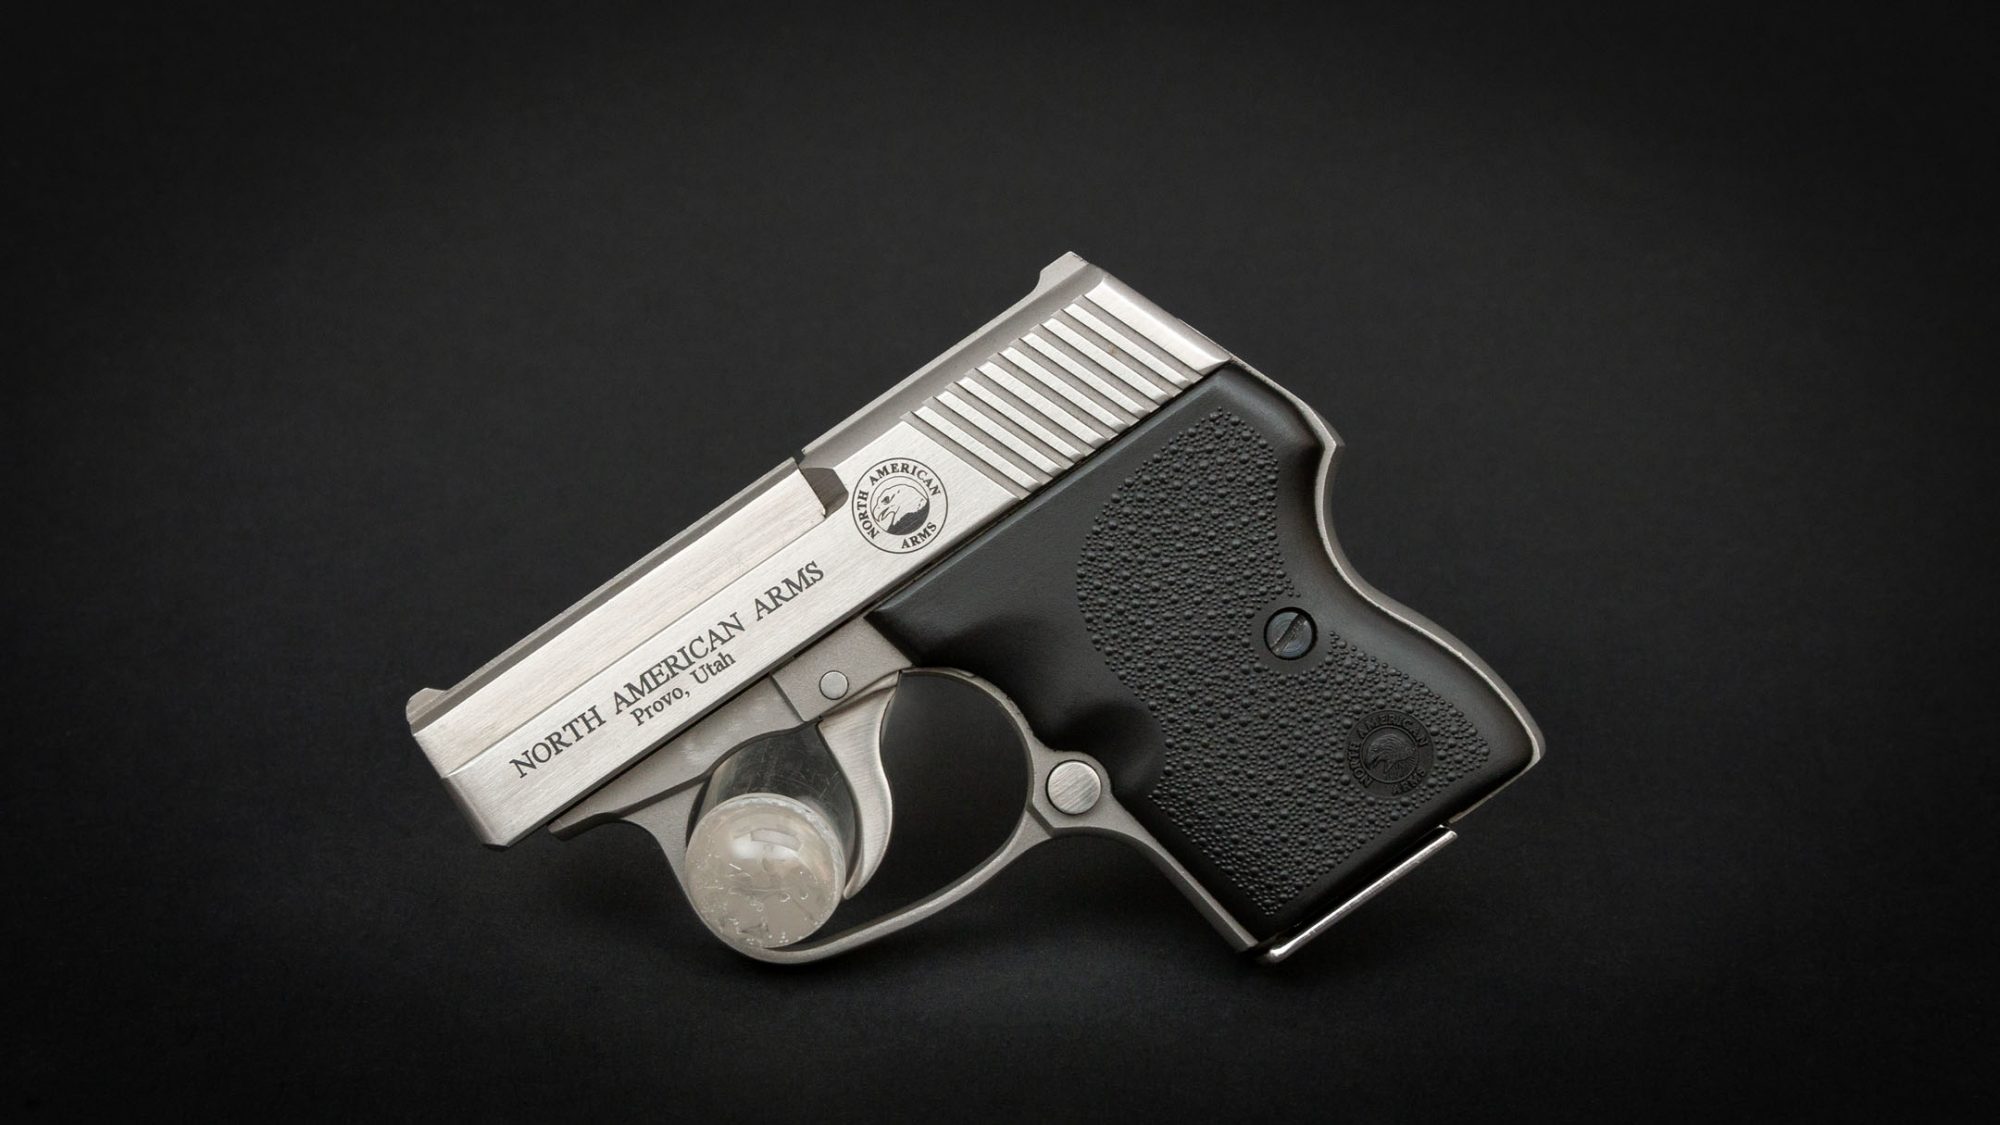 North American Arms Guardian in .32 ACP, for sale by Turnbull Restoration Co. of Bloomfield, NY